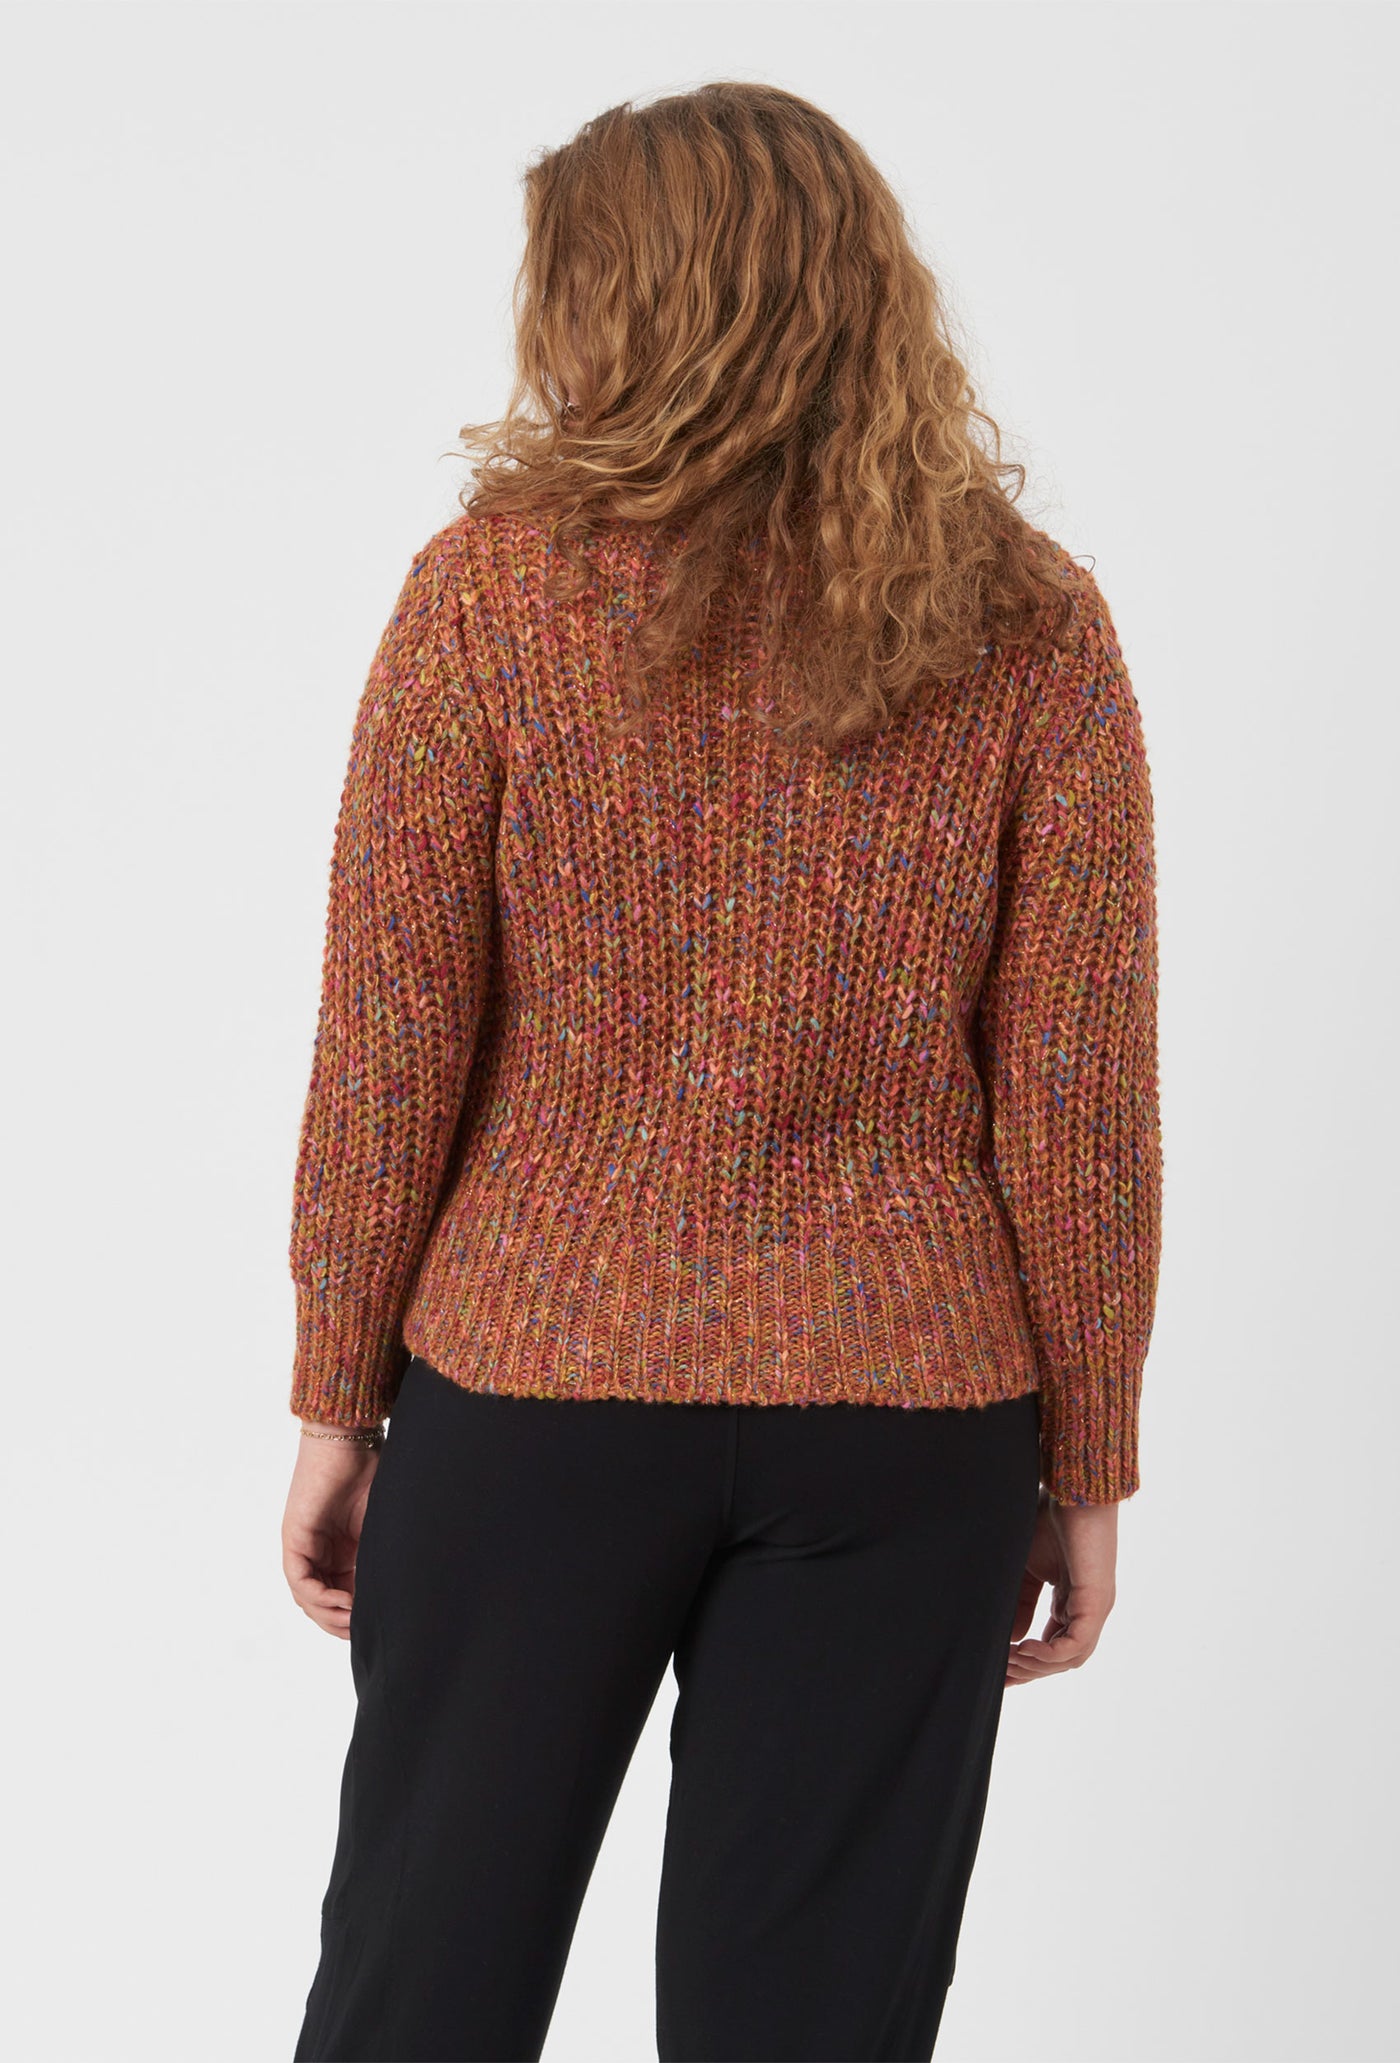 Pont Neuf PNKiwi Knit Pullover 316 Burned red